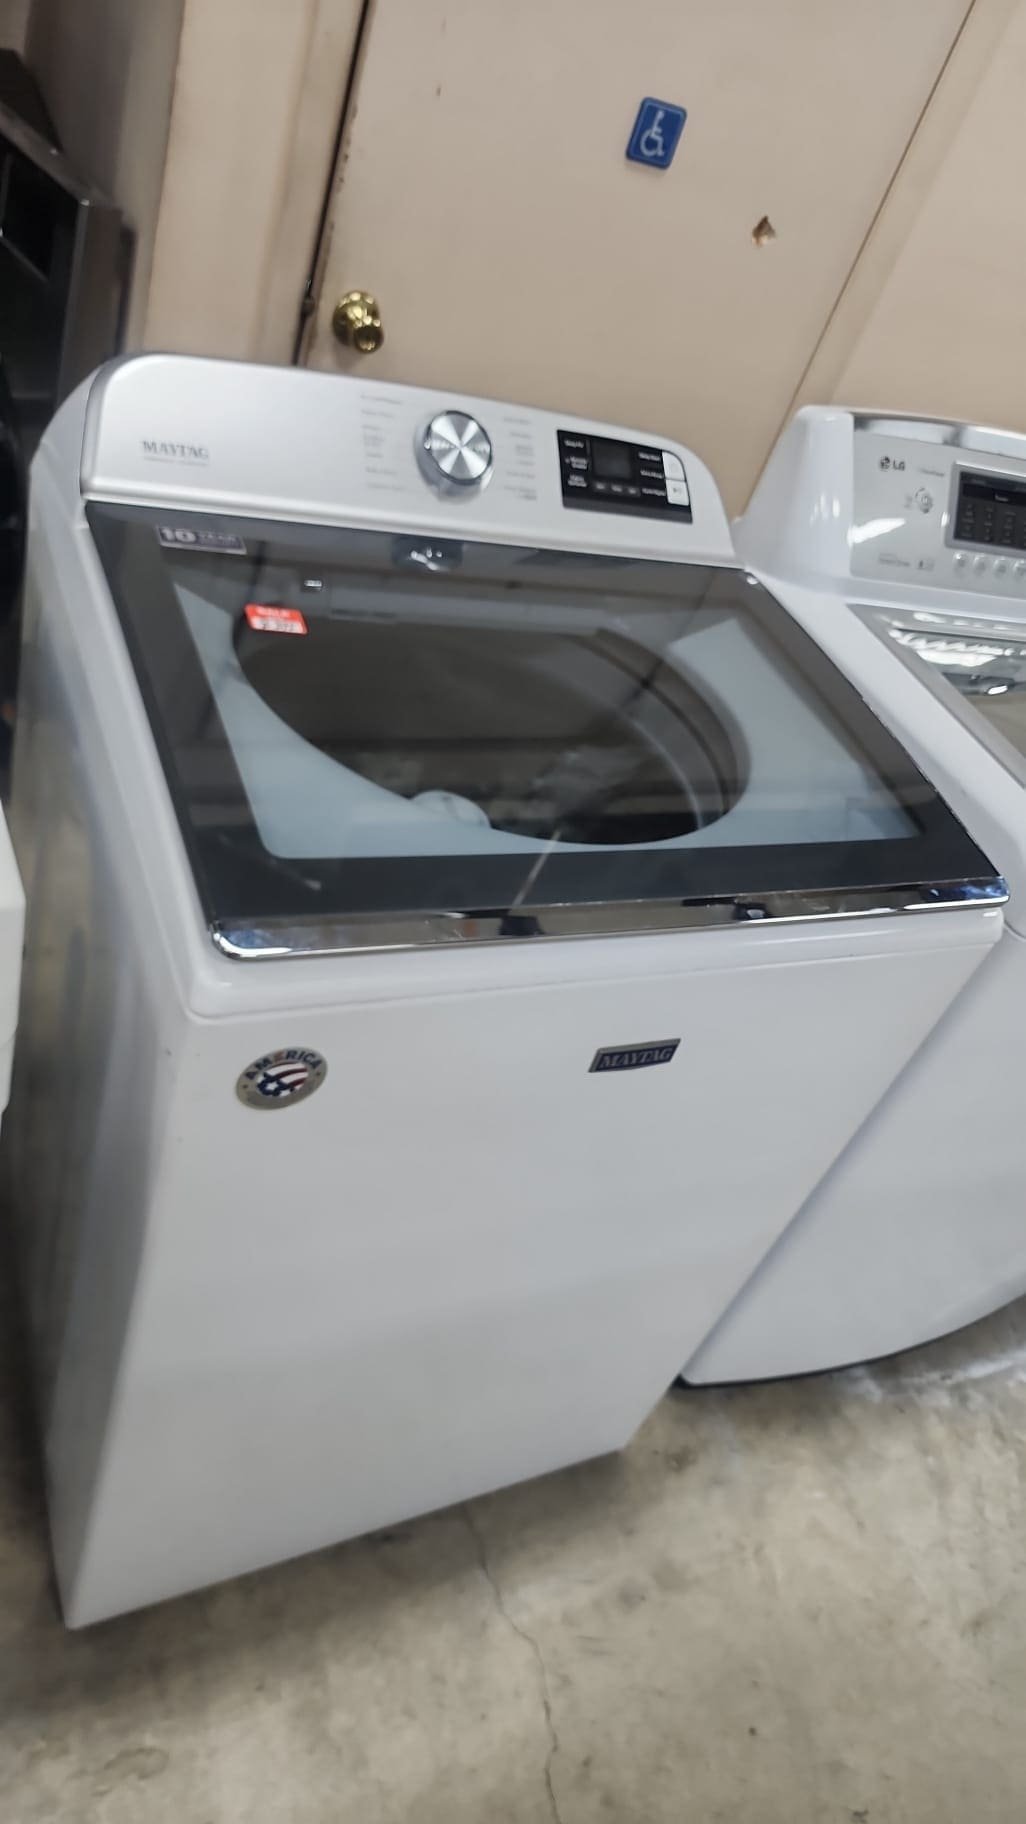 Maytag Used Top Loading Washer – White